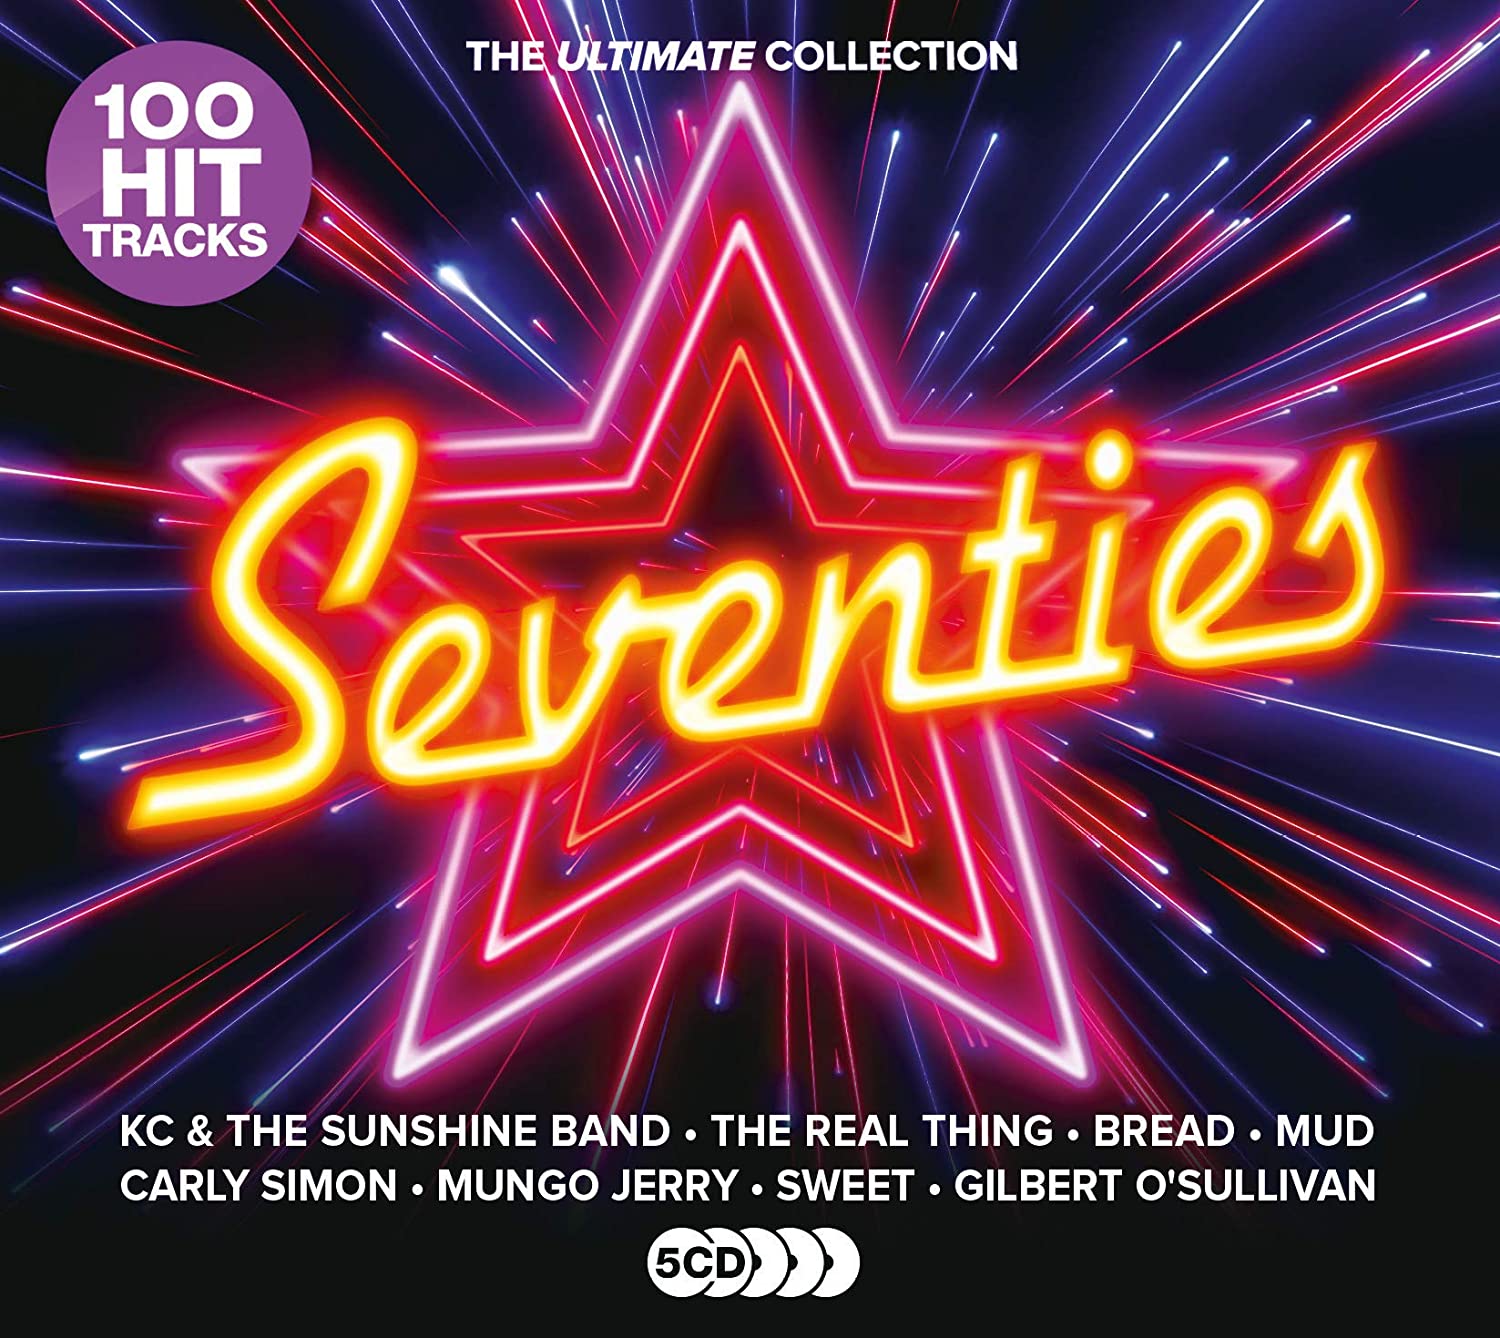 The Ultimate Collection Seventies (2021)